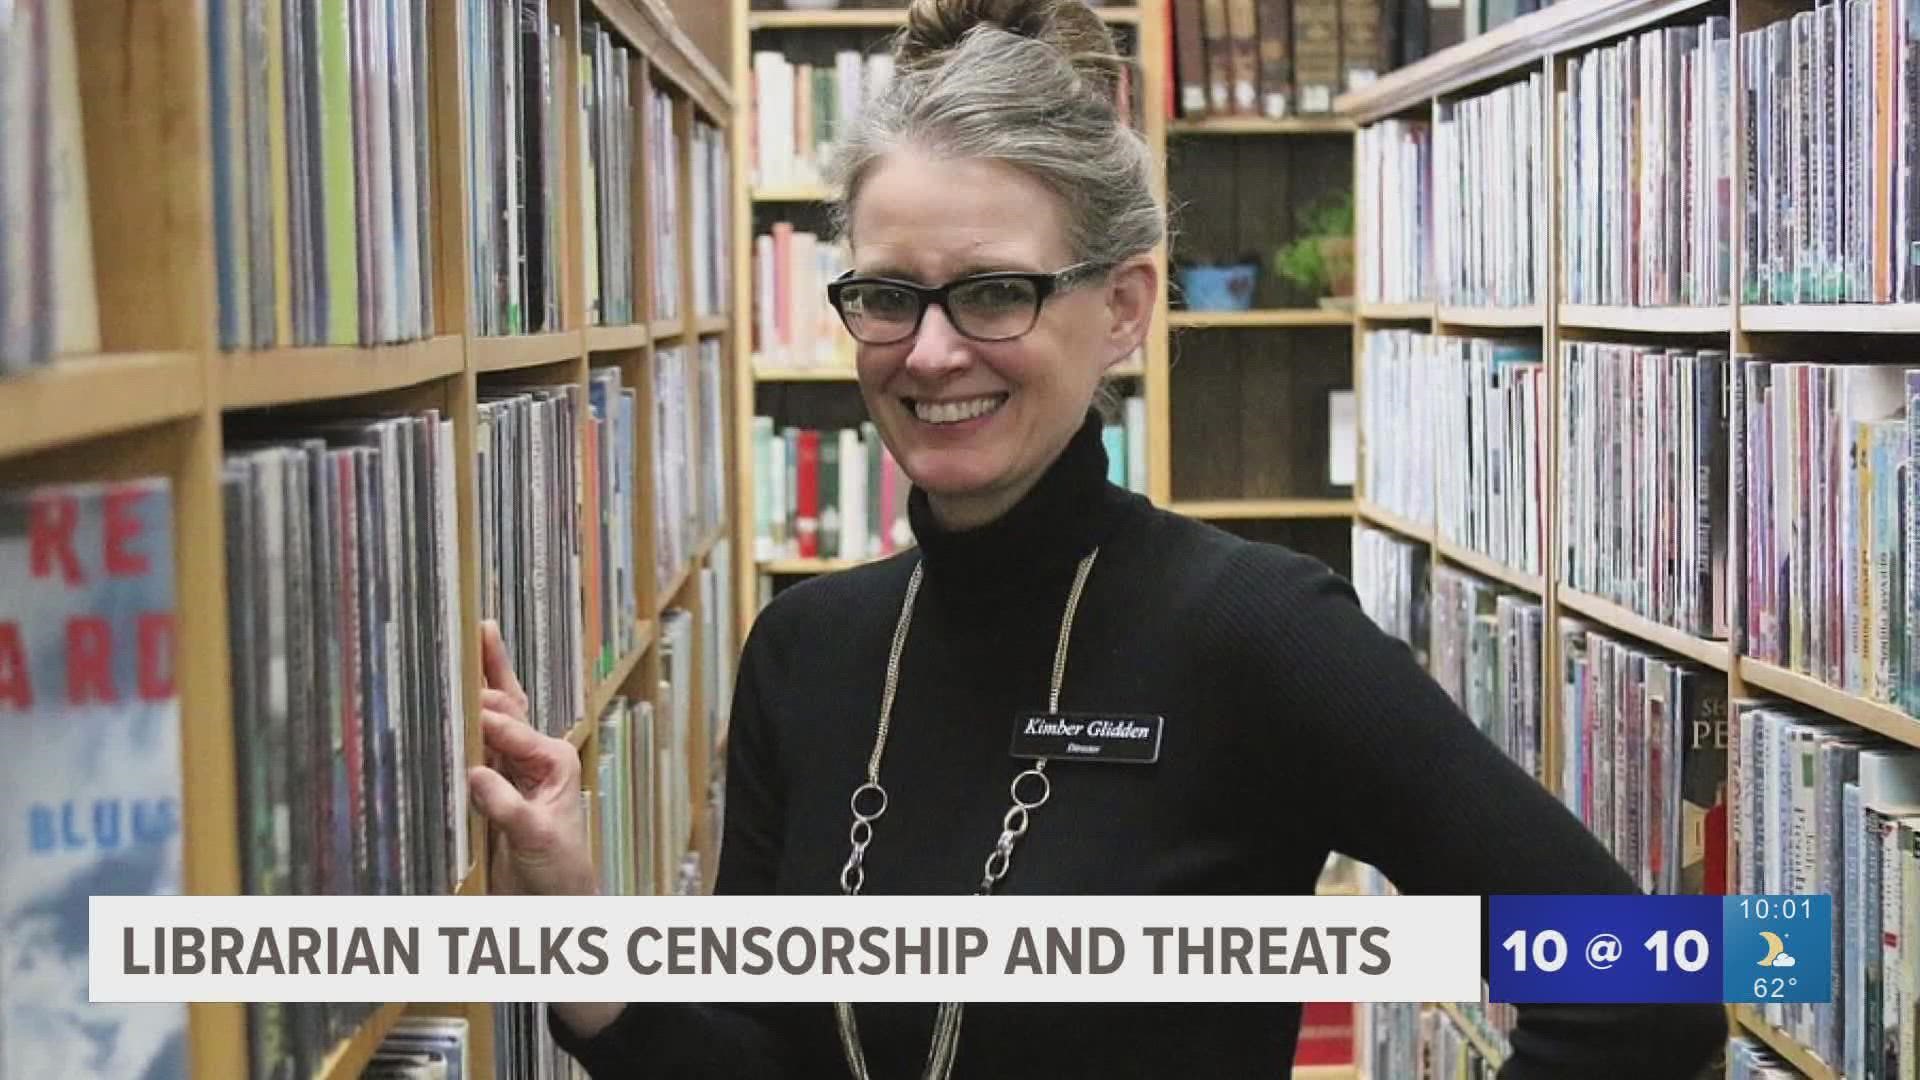 Kimber Glidden, the former director of the Boundary County Library, says communities, especially smaller ones, need to support their libraries and fight censorship.